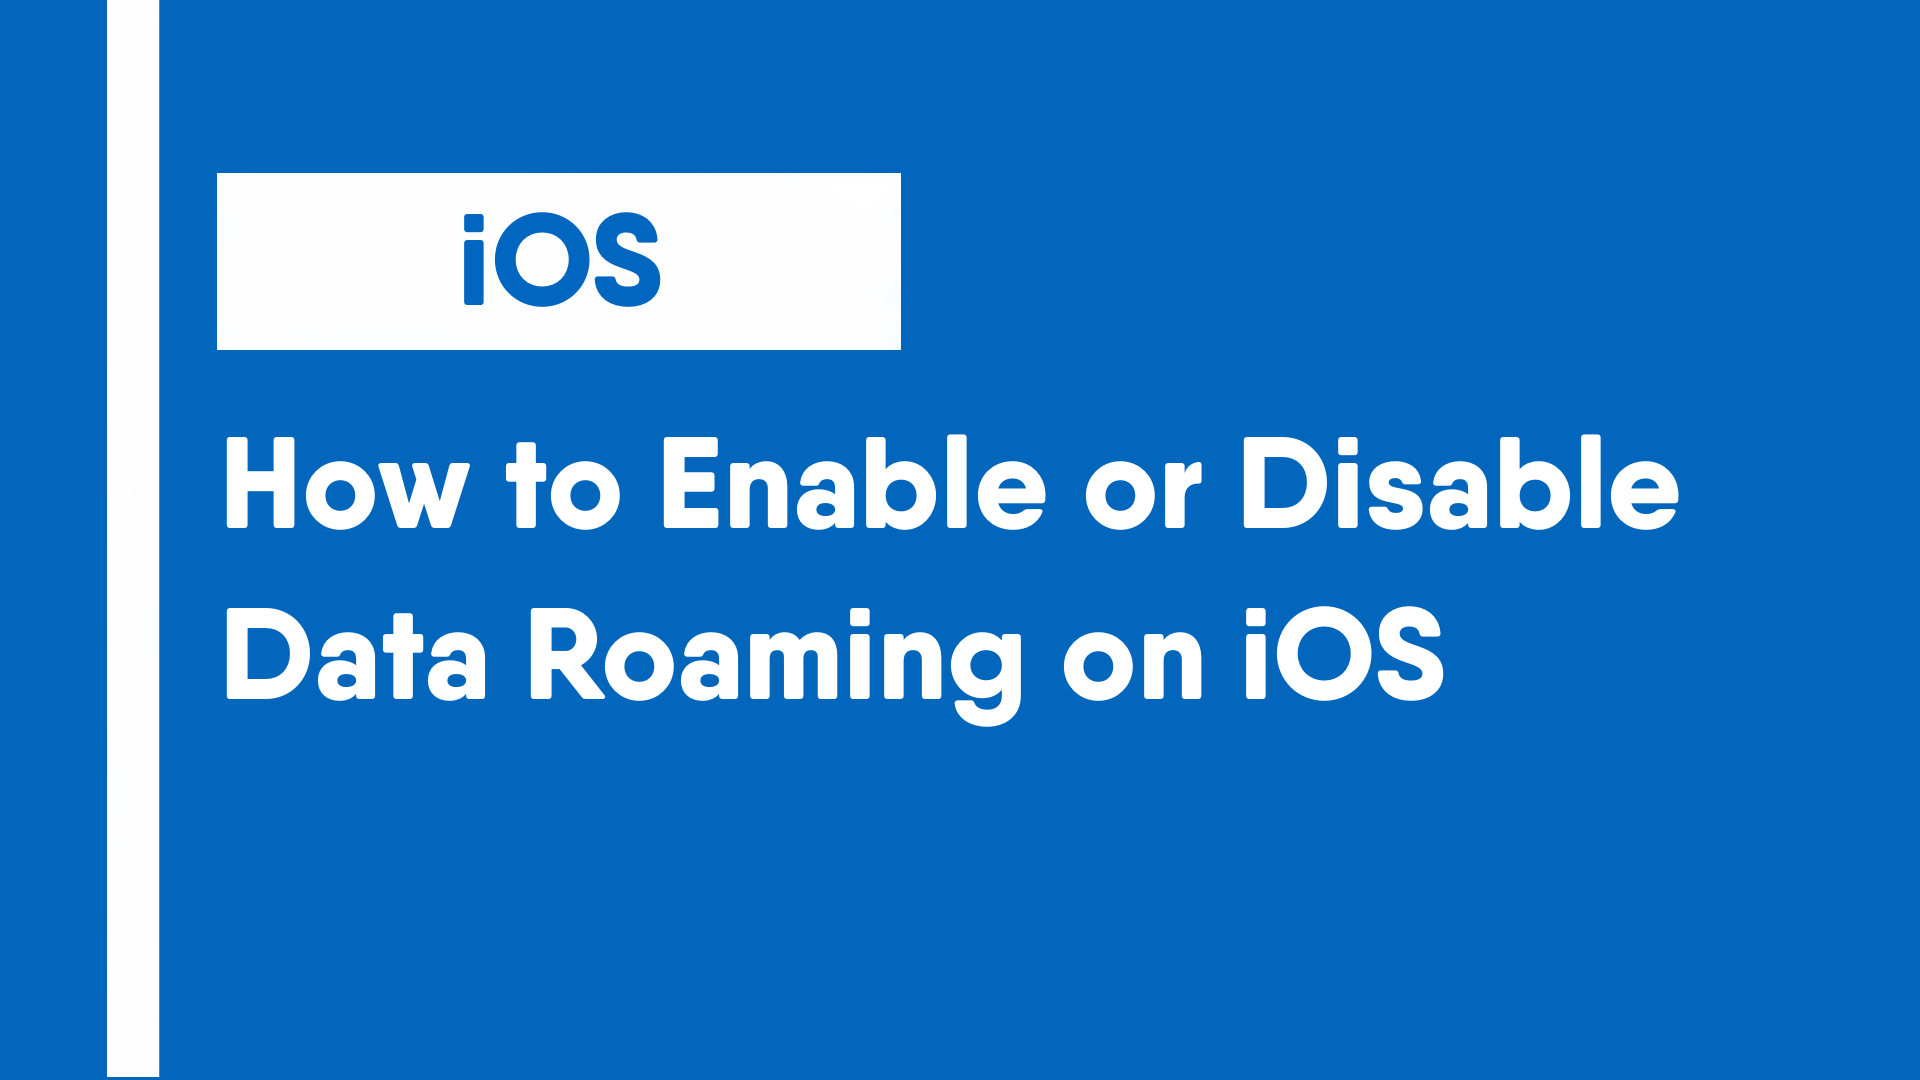 How to Enable or Disable Data Roaming on iOS